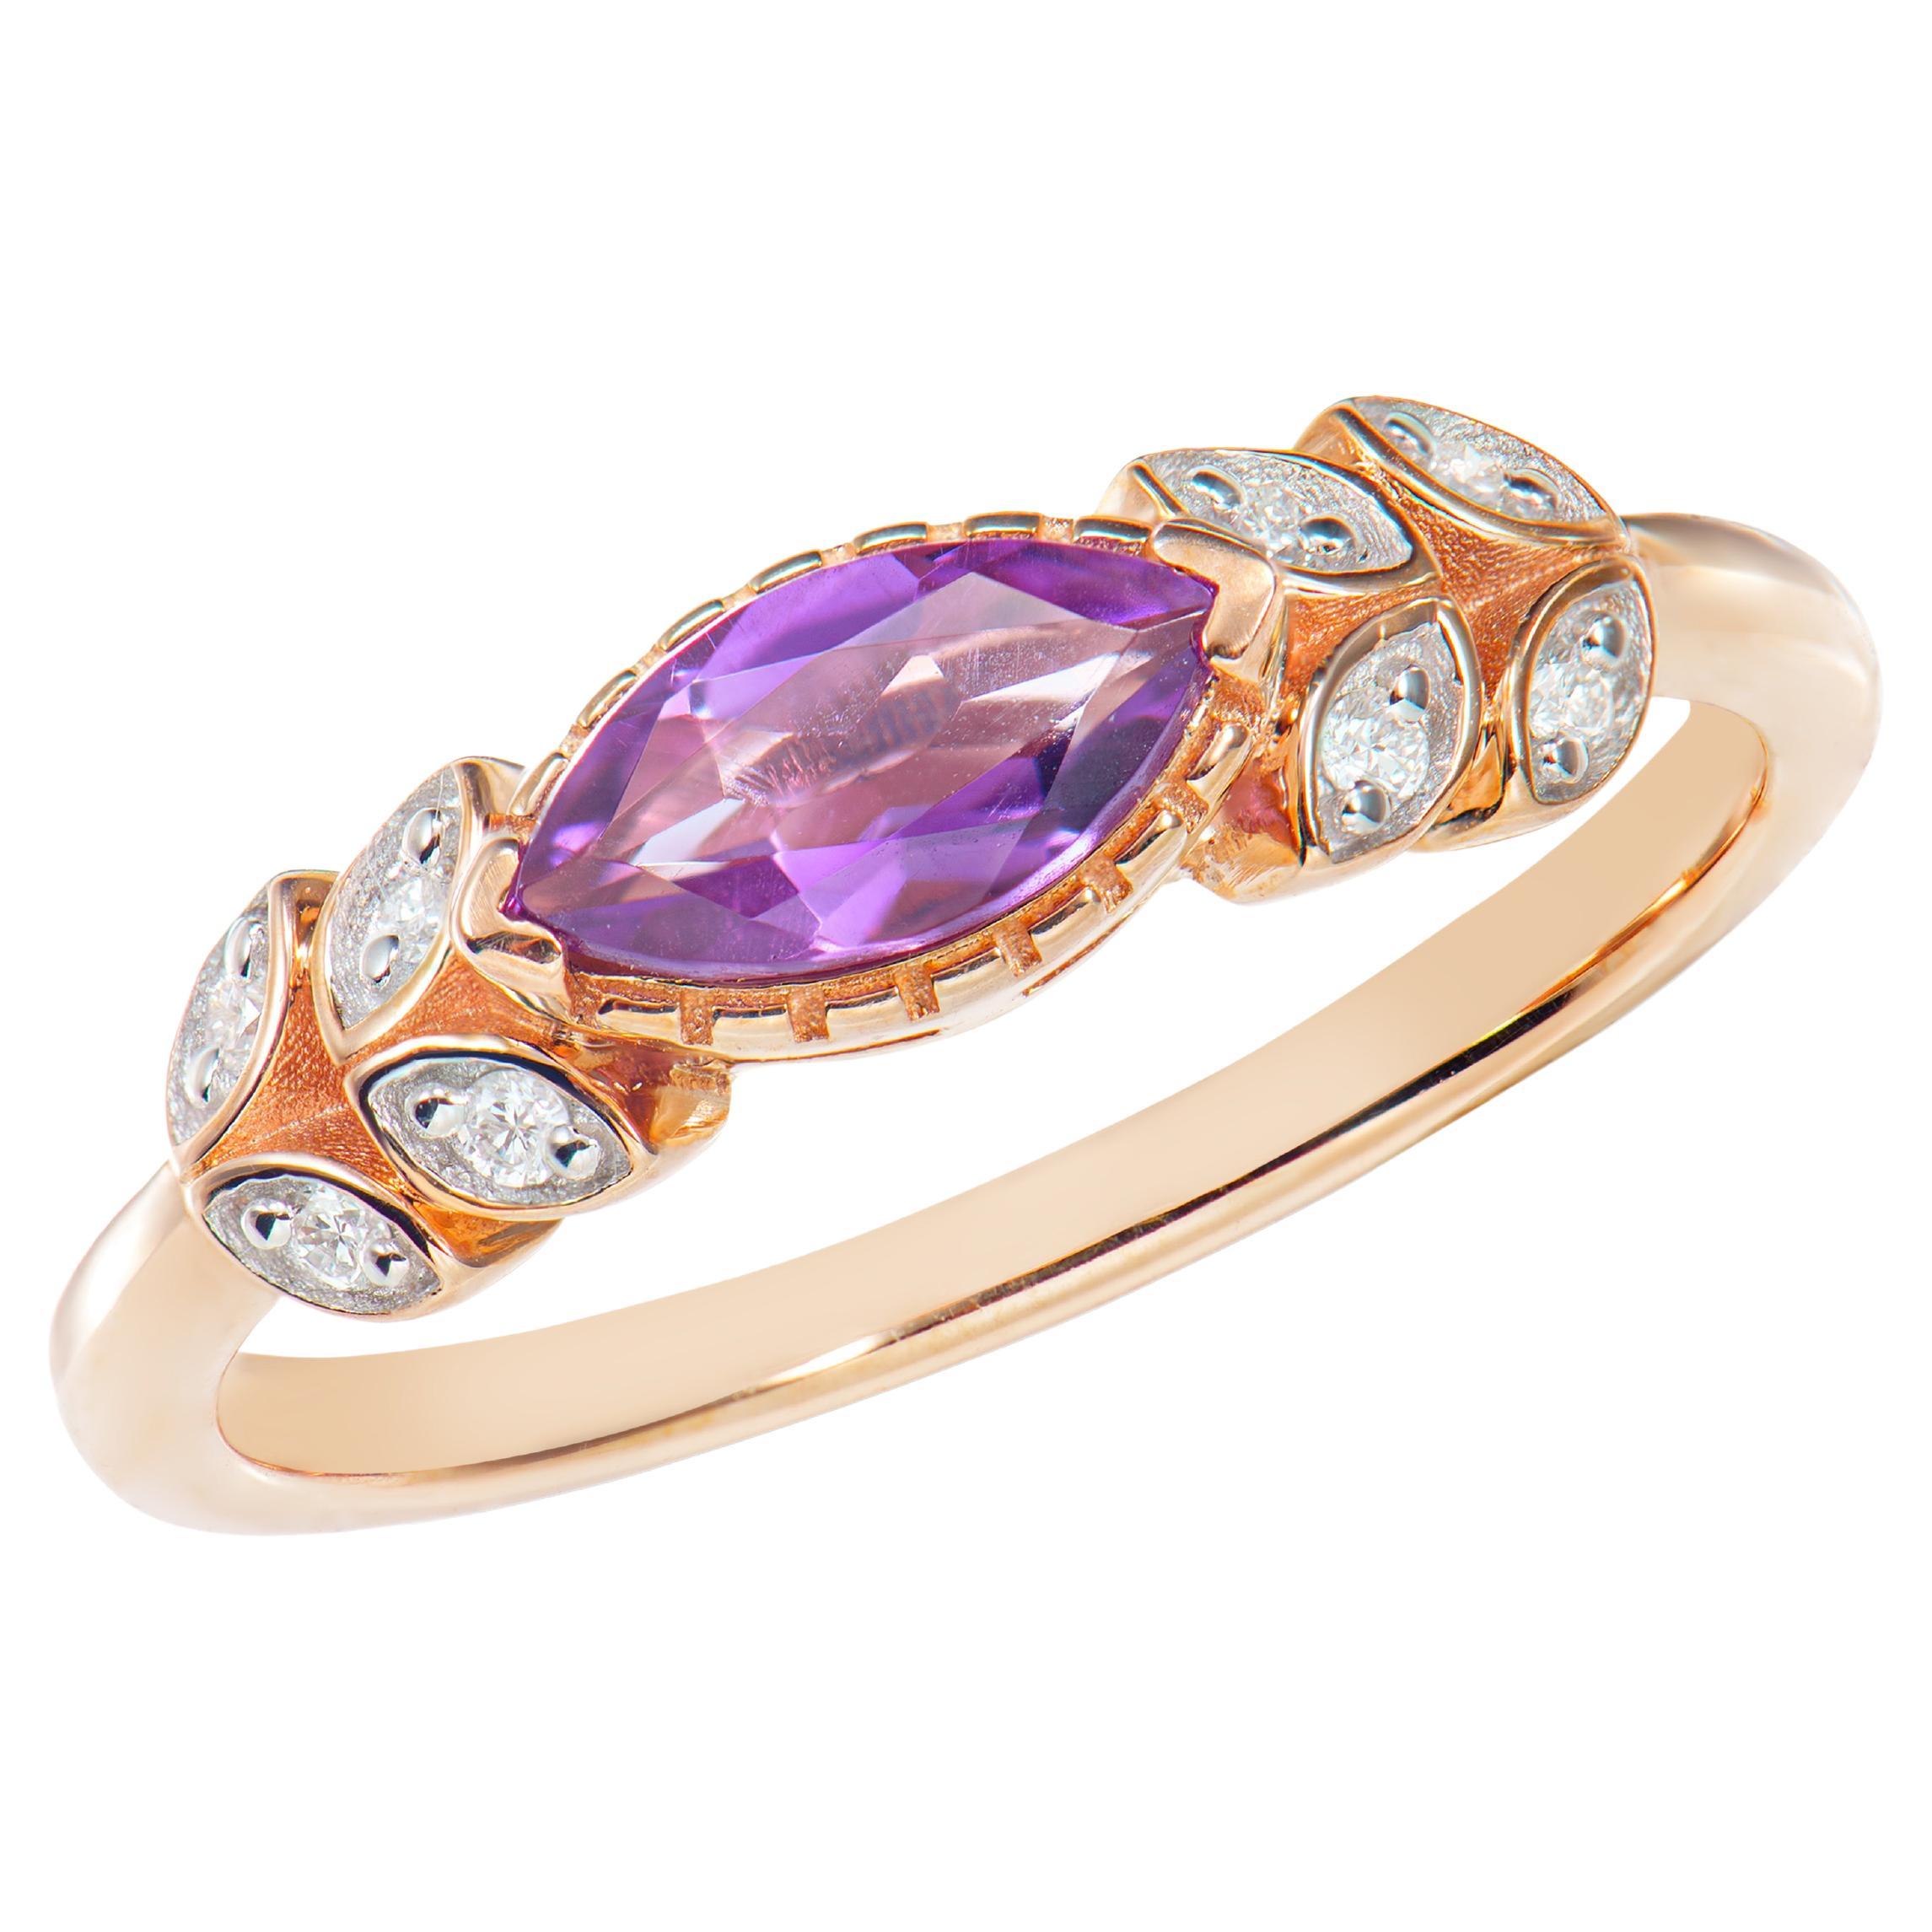 0.45 Carat Amethyst Fancy Ring in 14Karat Rose Gold with White Diamond.   For Sale